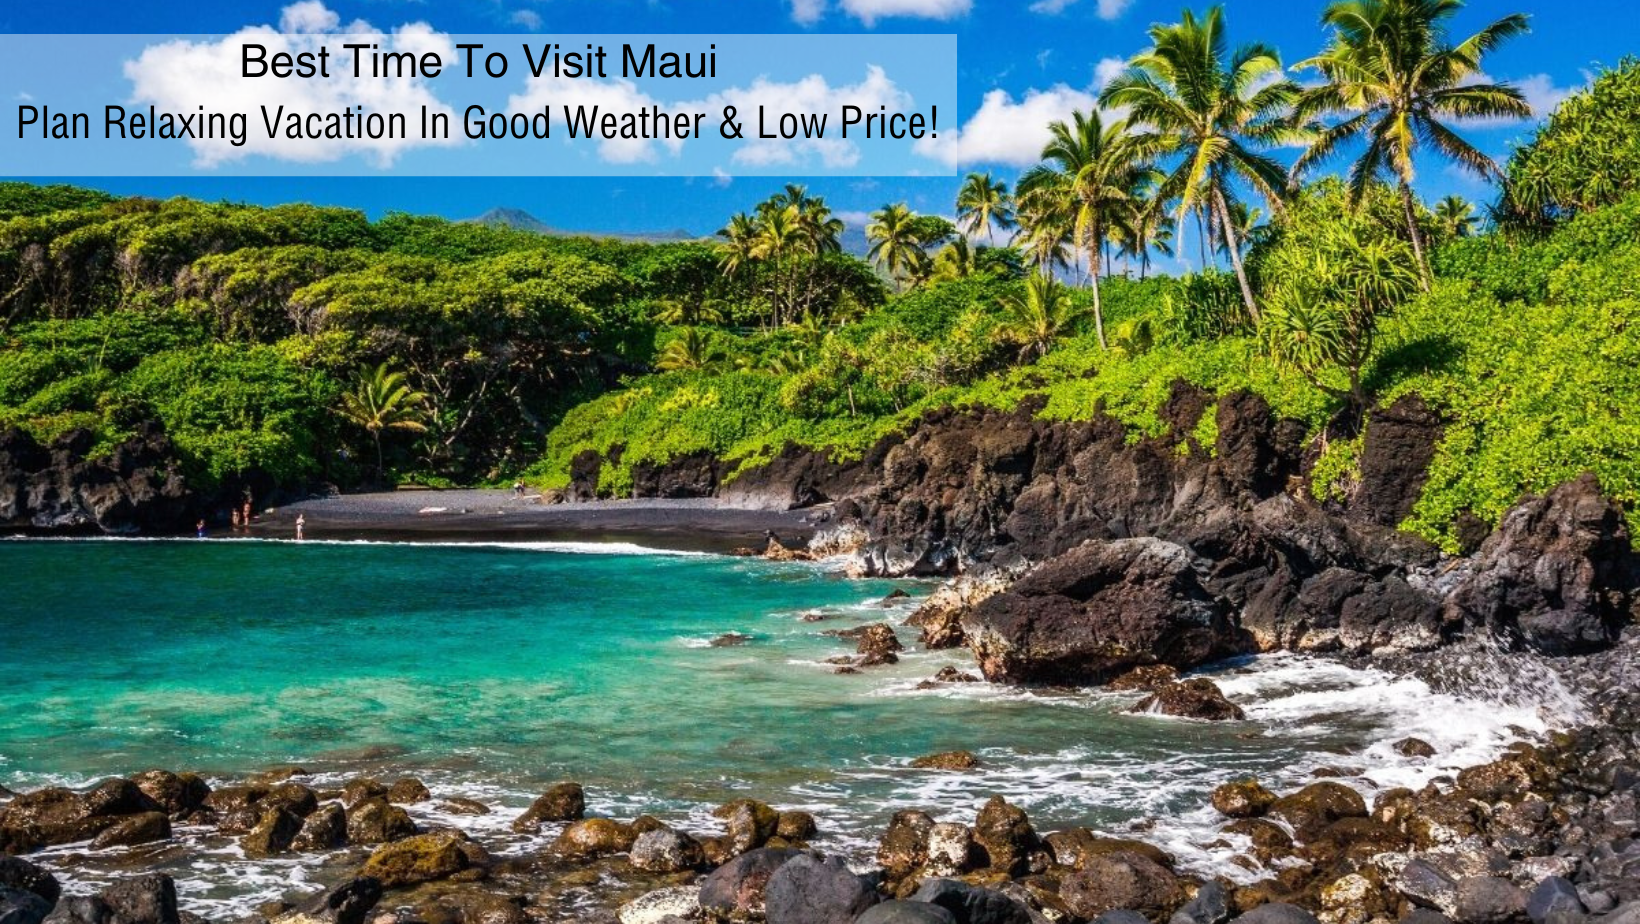 Best Time To Visit Maui - Plan Relaxing Vacation In Good Weather &Amp; Low Price!